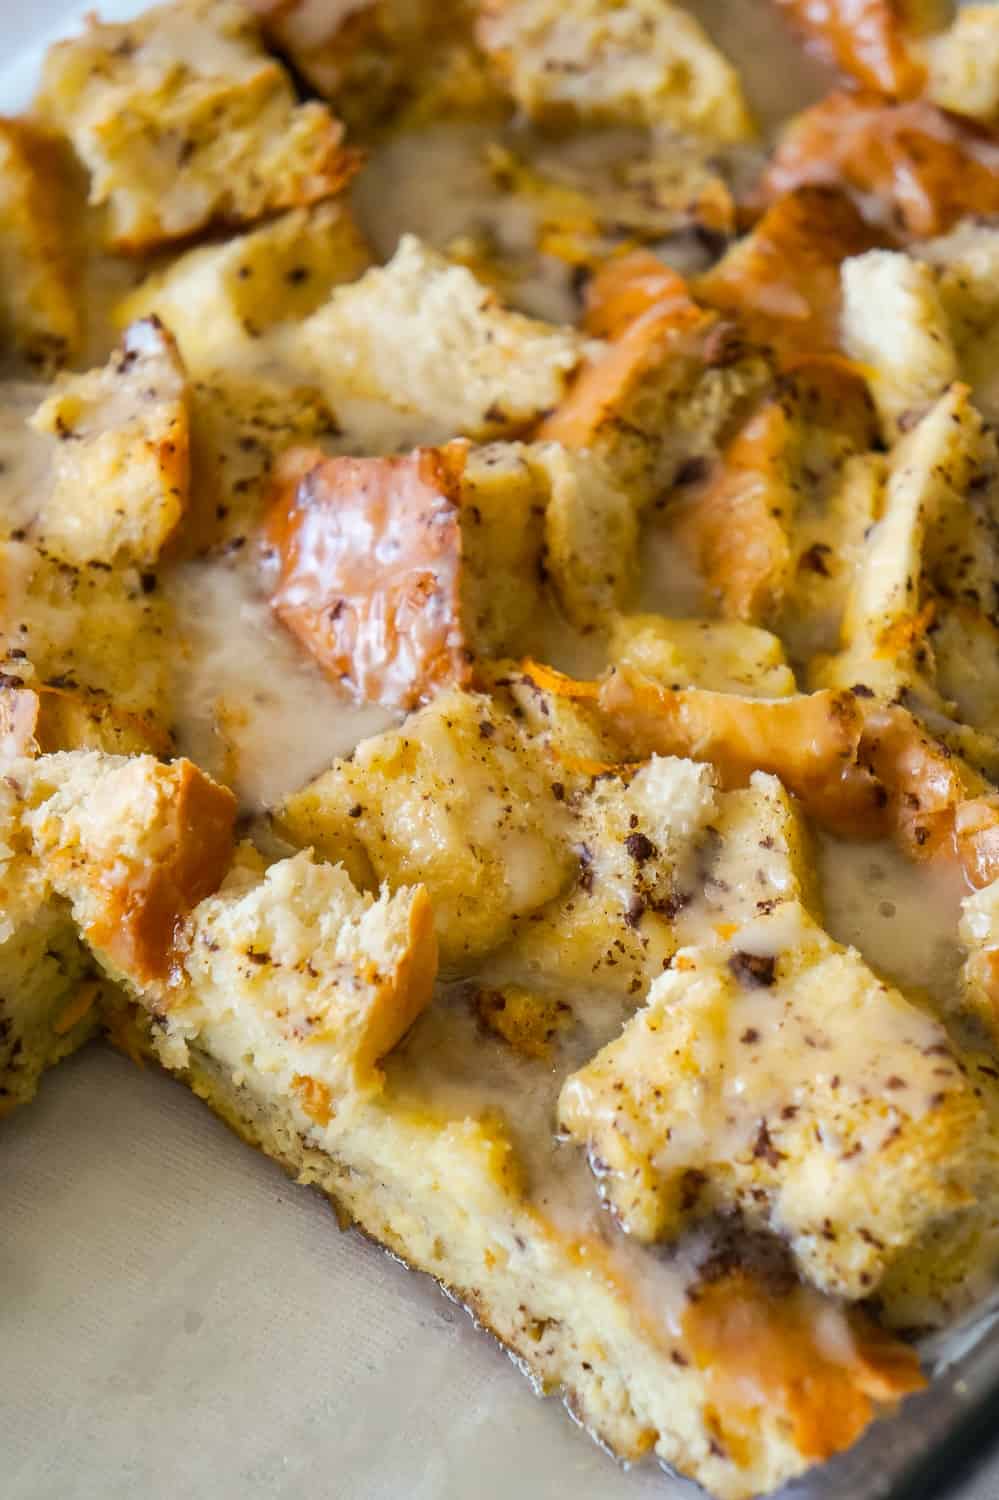 Overnight French Toast Casserole is an easy breakfast casserole recipe made with crusty French bread soaked in an egg mixture flavoured with ground cinnamon, fresh squeezed orange juice and orange zest.